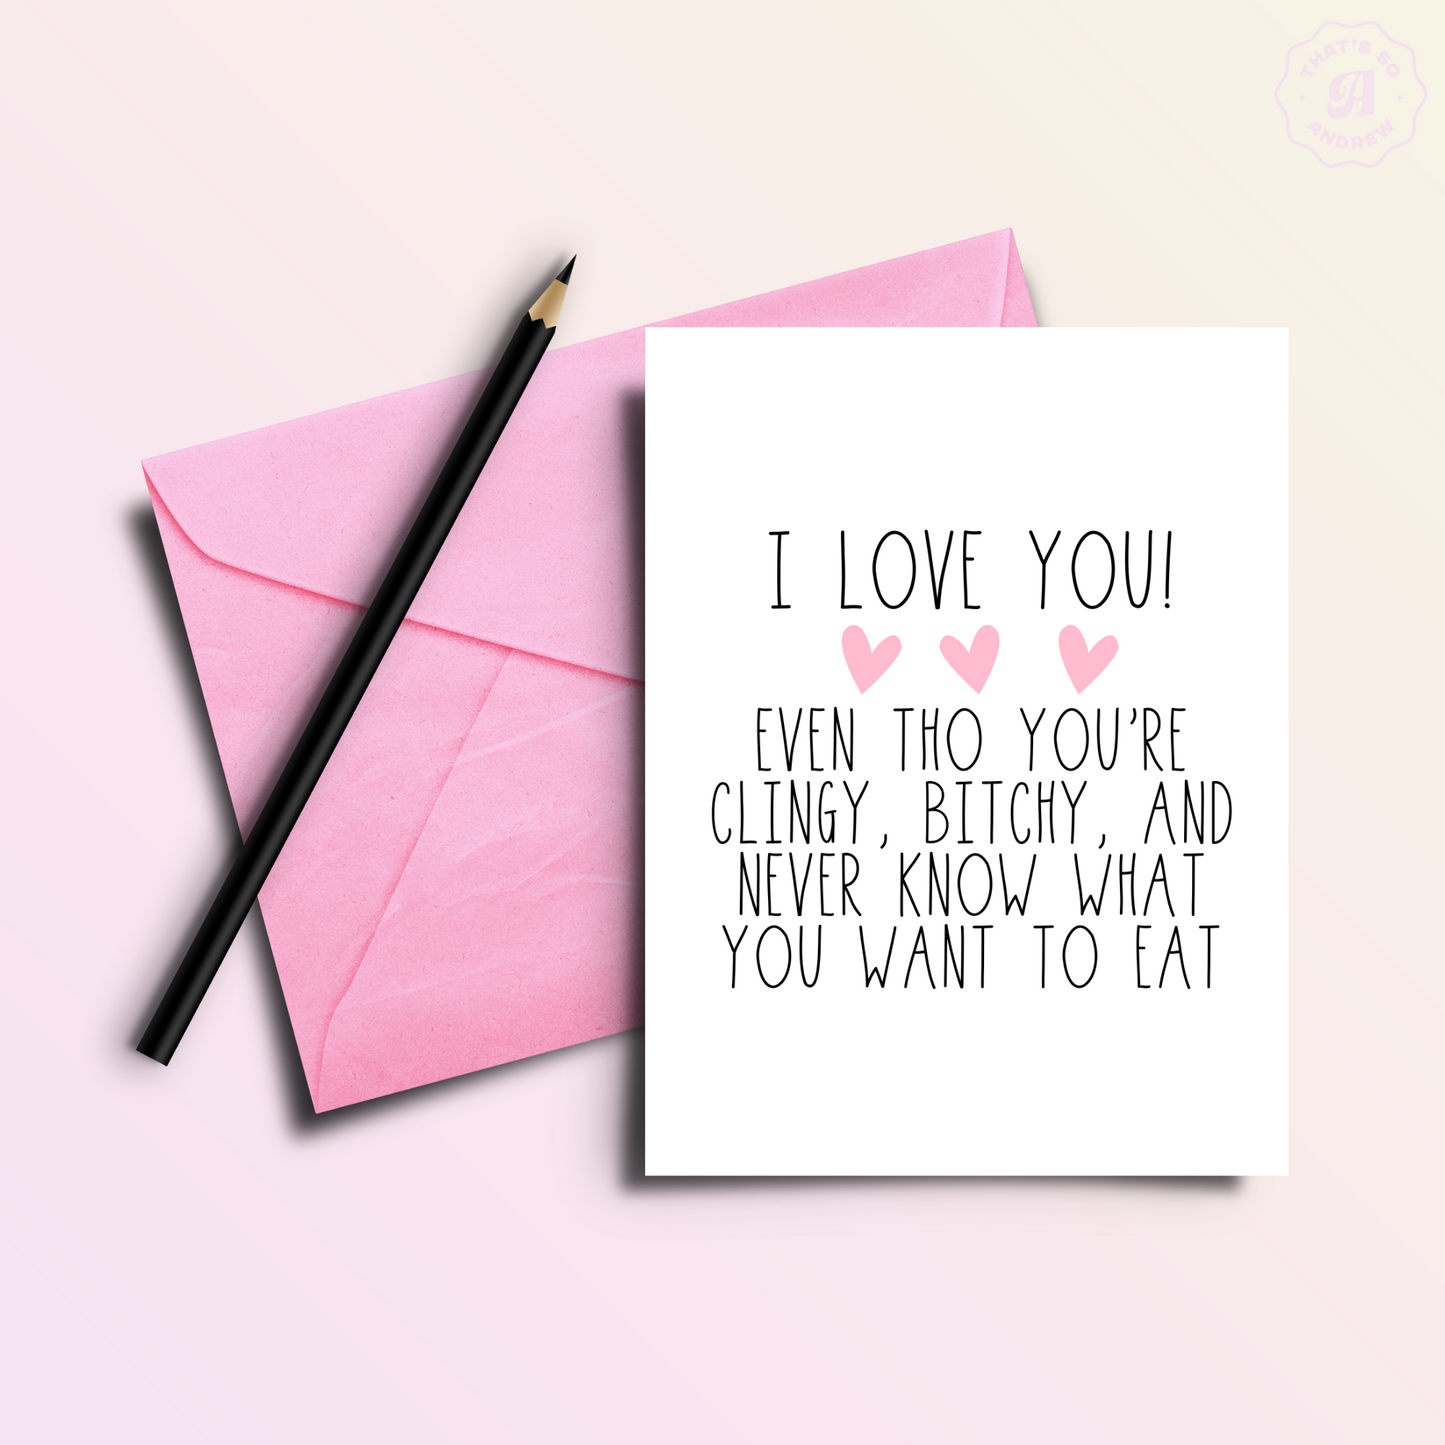 I Love You Even Tho You're Clingy and a Place to Eat | Valentine Love Card